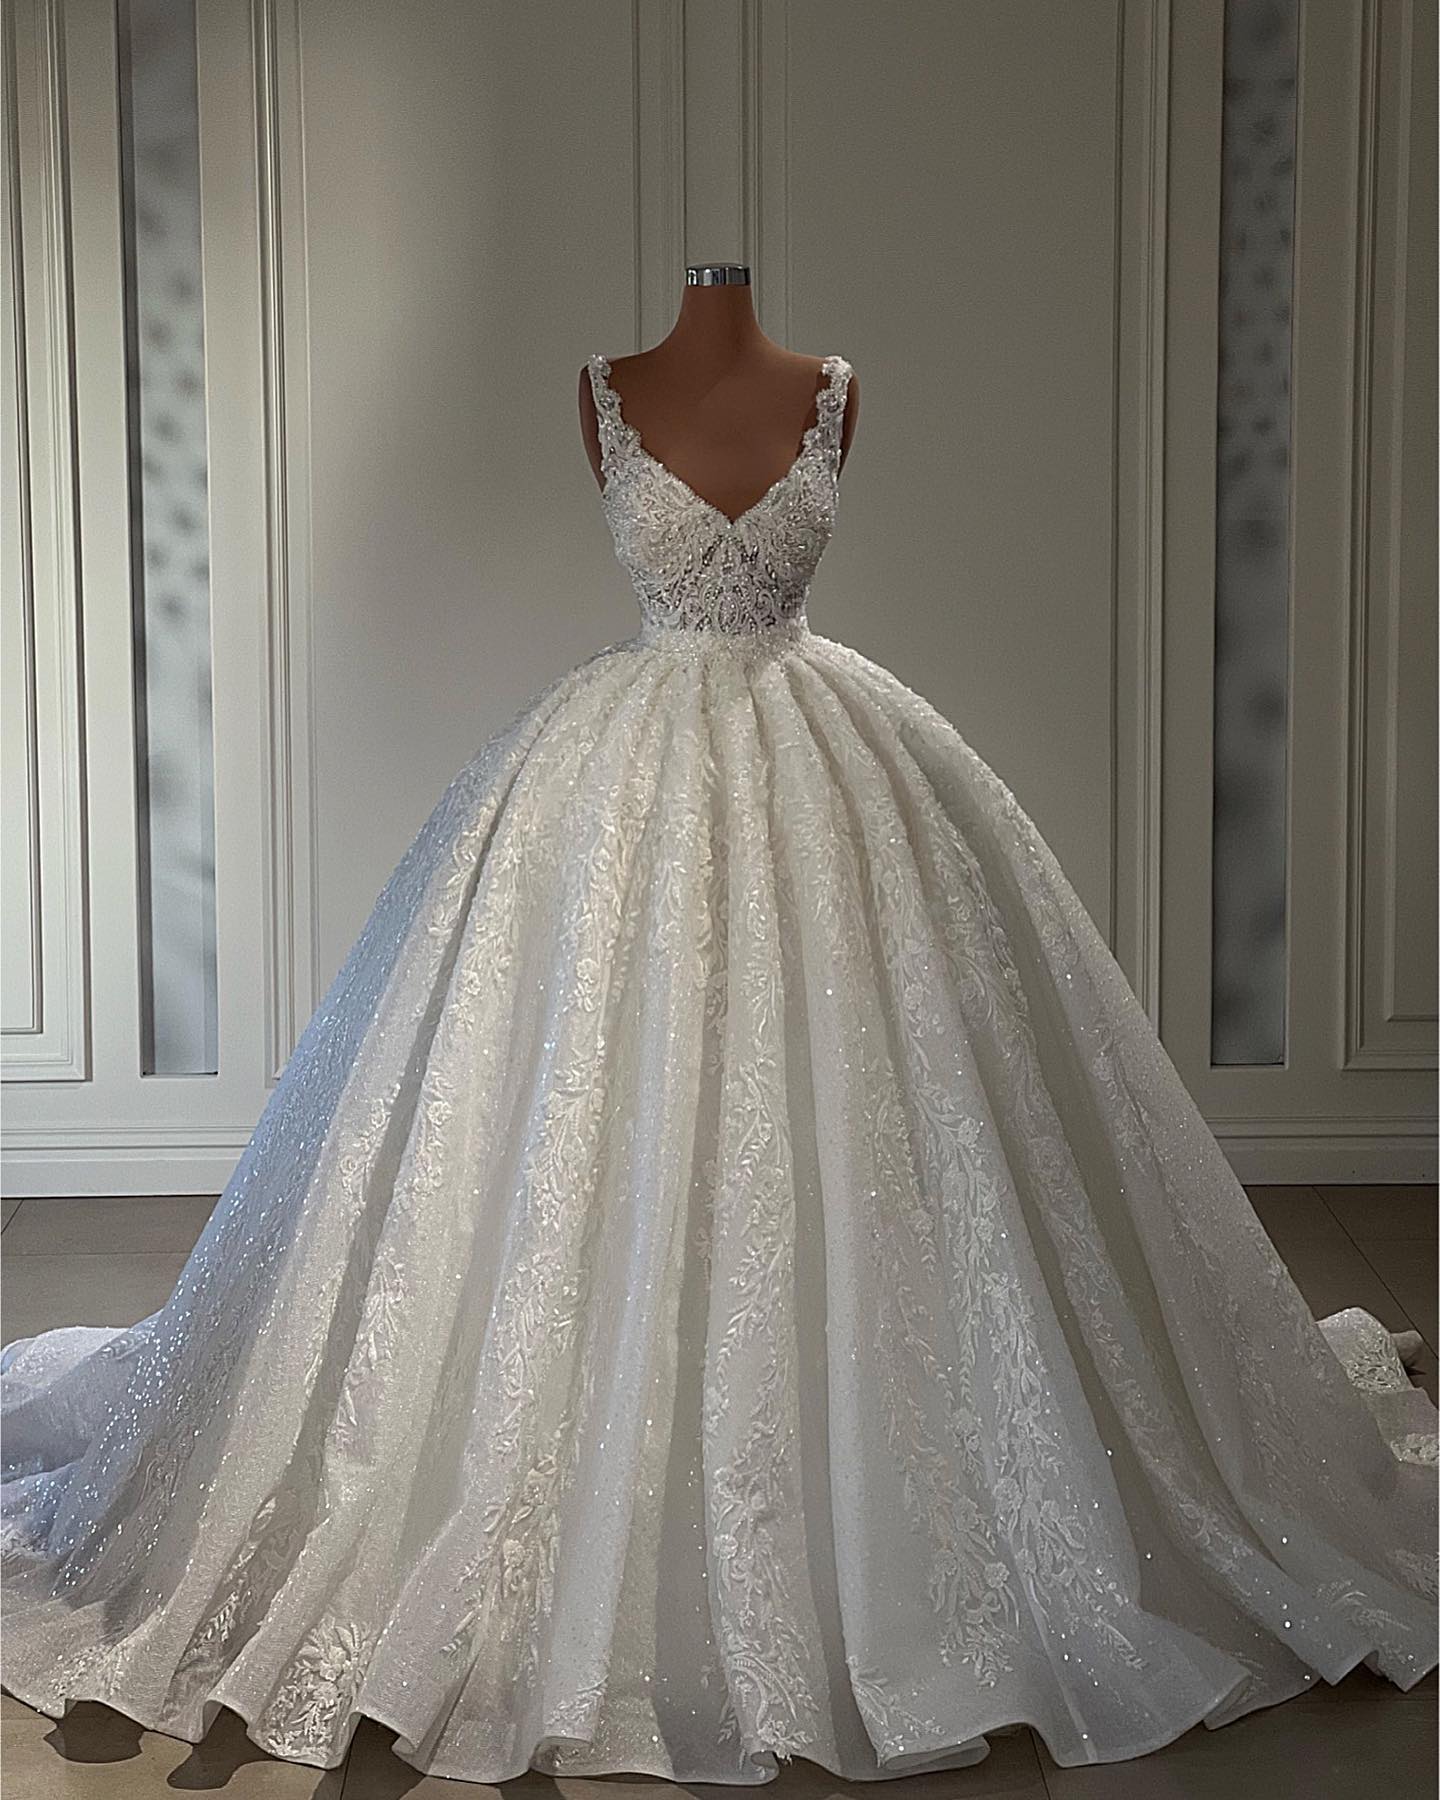 V-Neck Sleeveless Wedding Dress Ball Gown With Lace Appliques-27dress